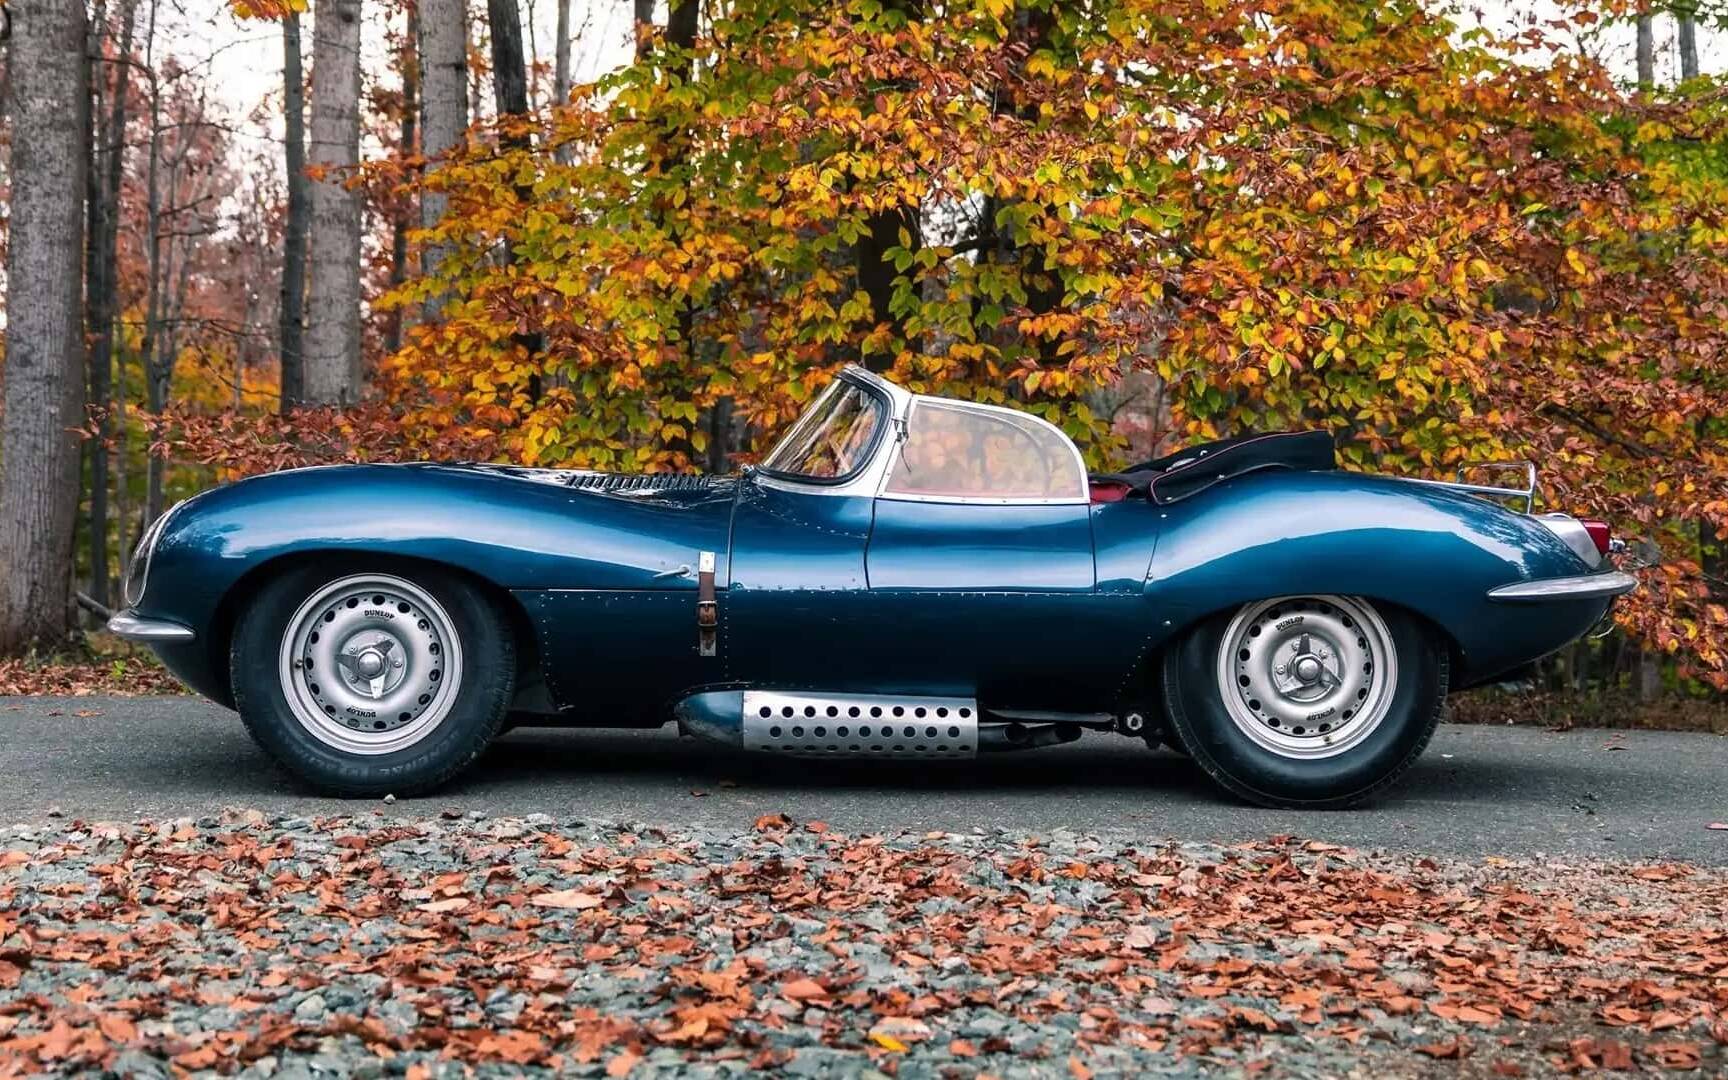 this auction-bound 1957 jaguar xkss may be worth over $18m